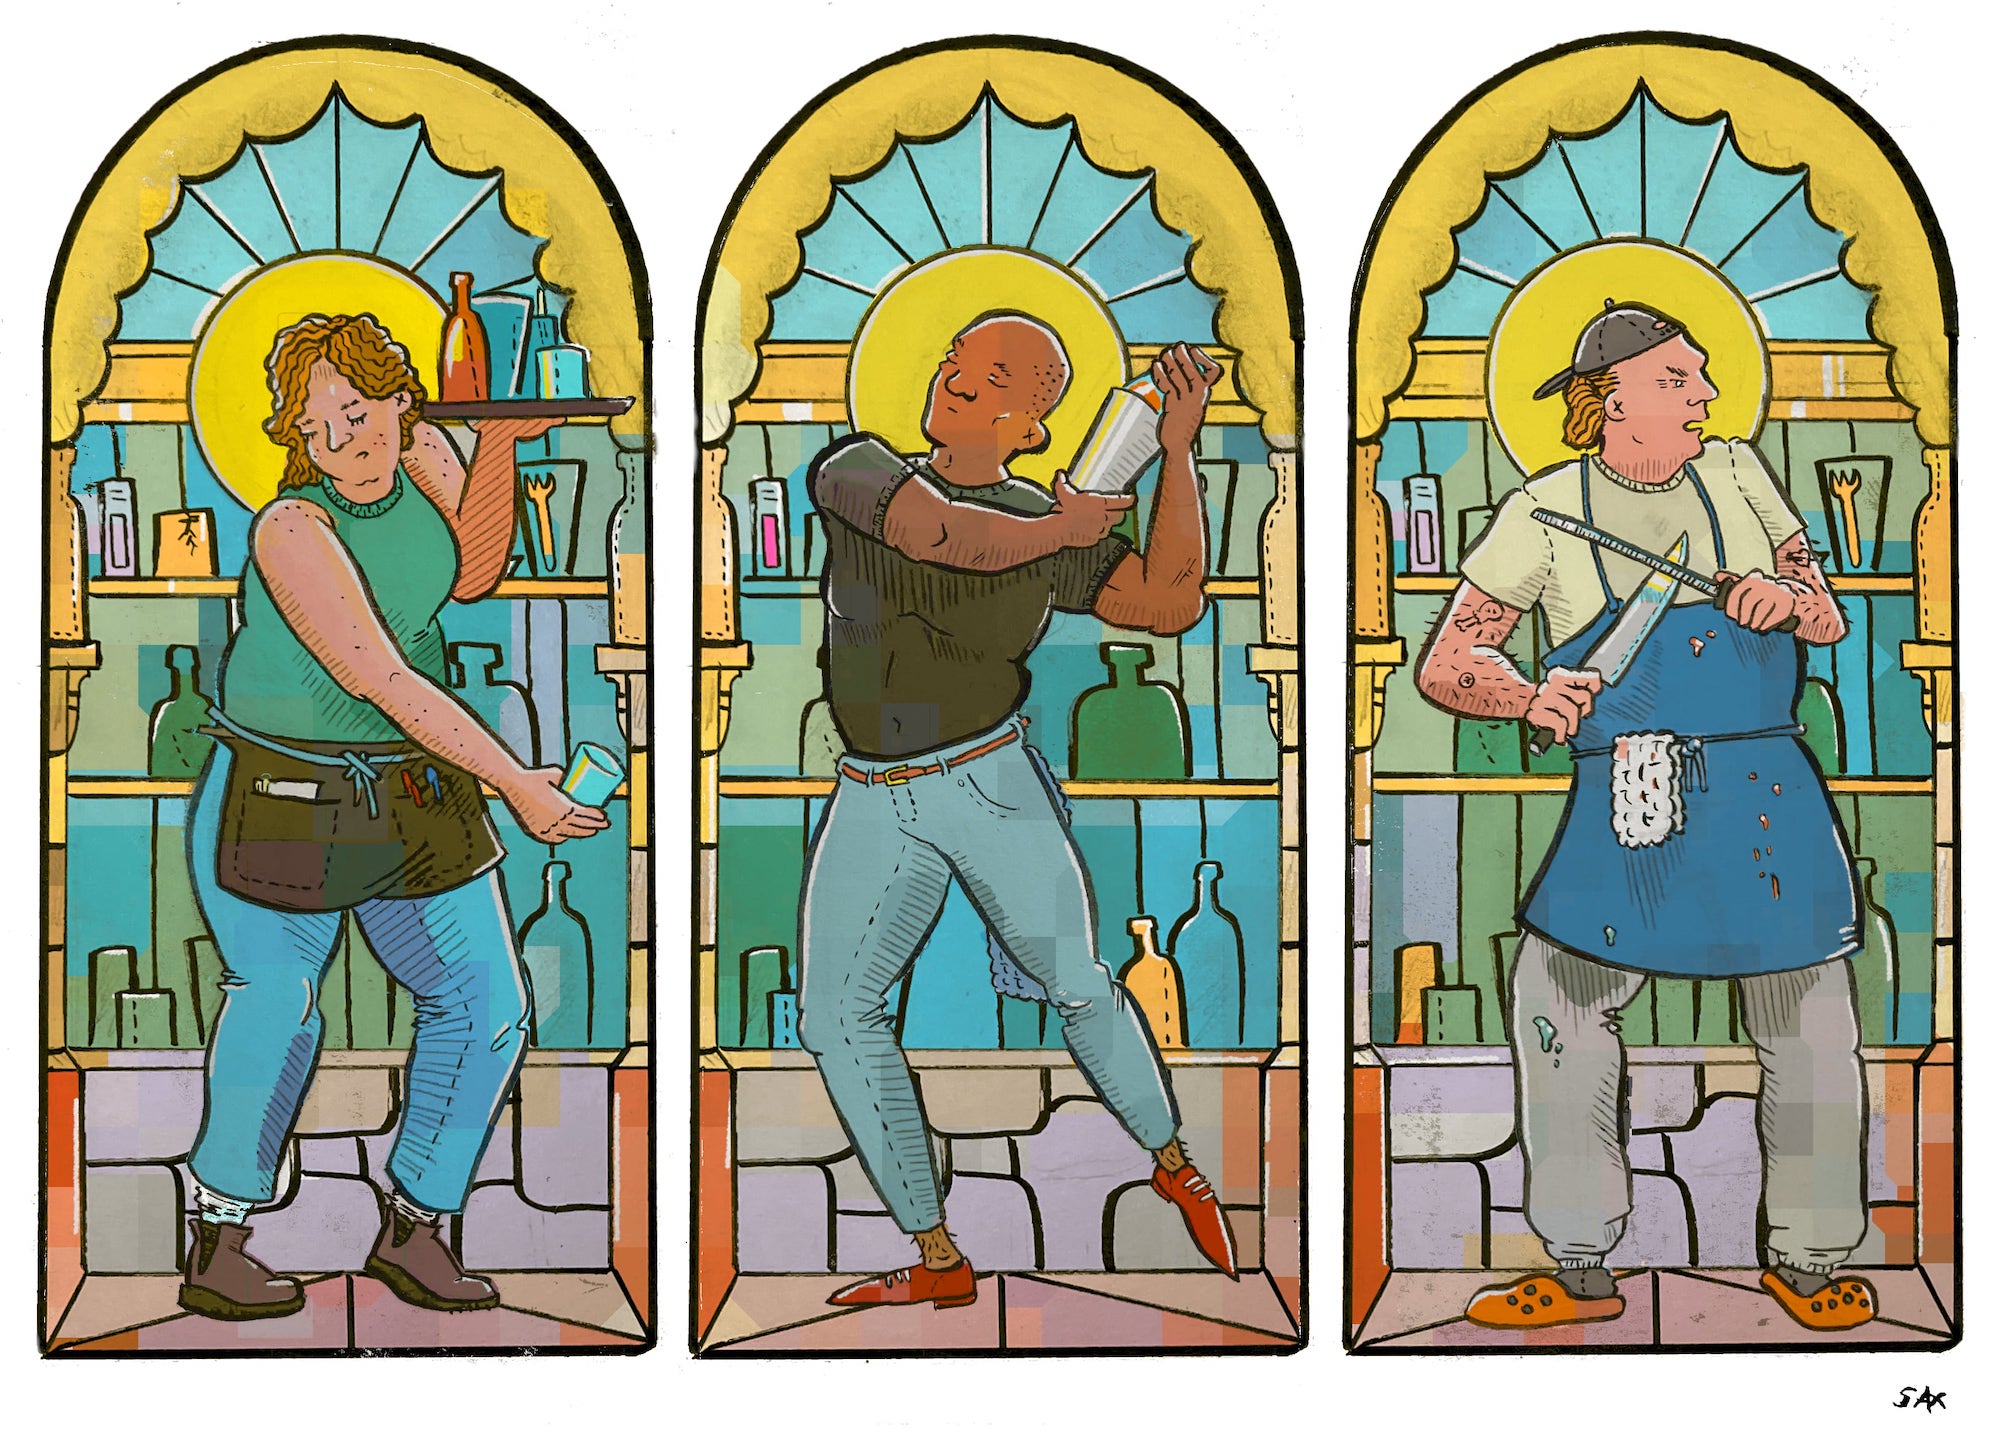 An illustration of three restaurant workers as saints immortalized in stained glass.